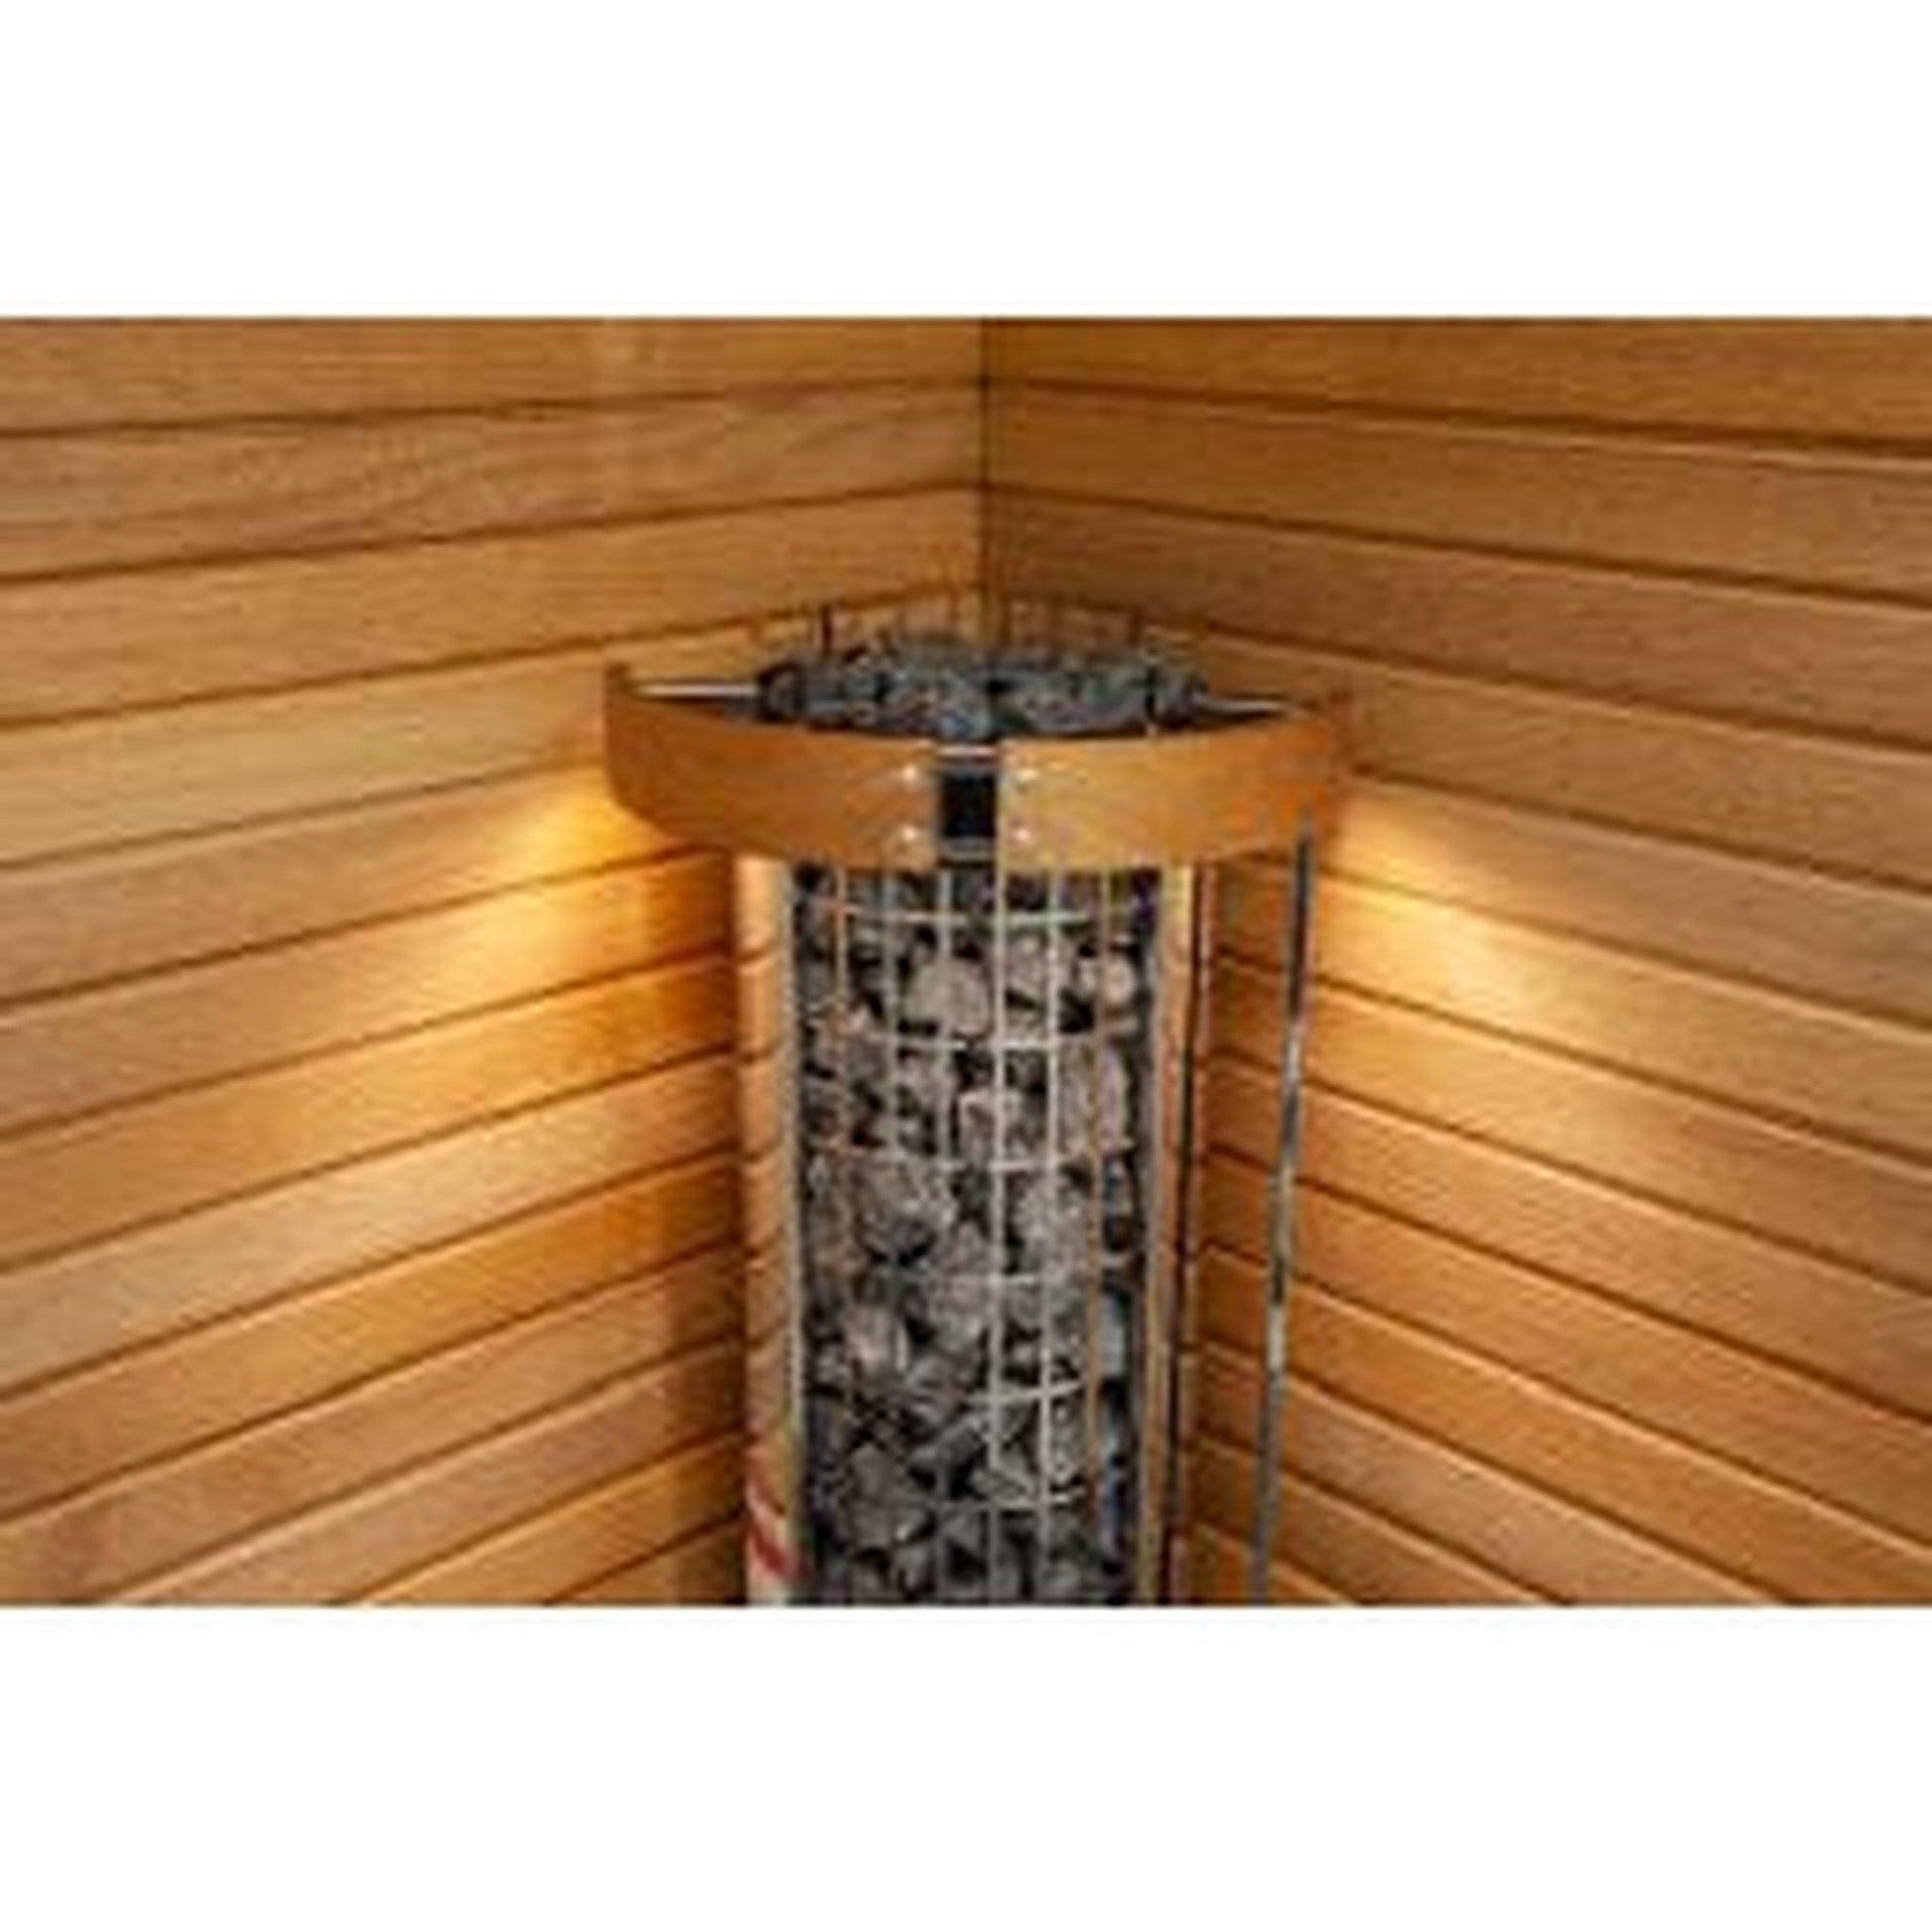 Harvia Cilindro Half Series 6 kW 240V 1PH Freestanding Stainless Steel Electric Sauna Heater With Built-In Timer and Temperature Control